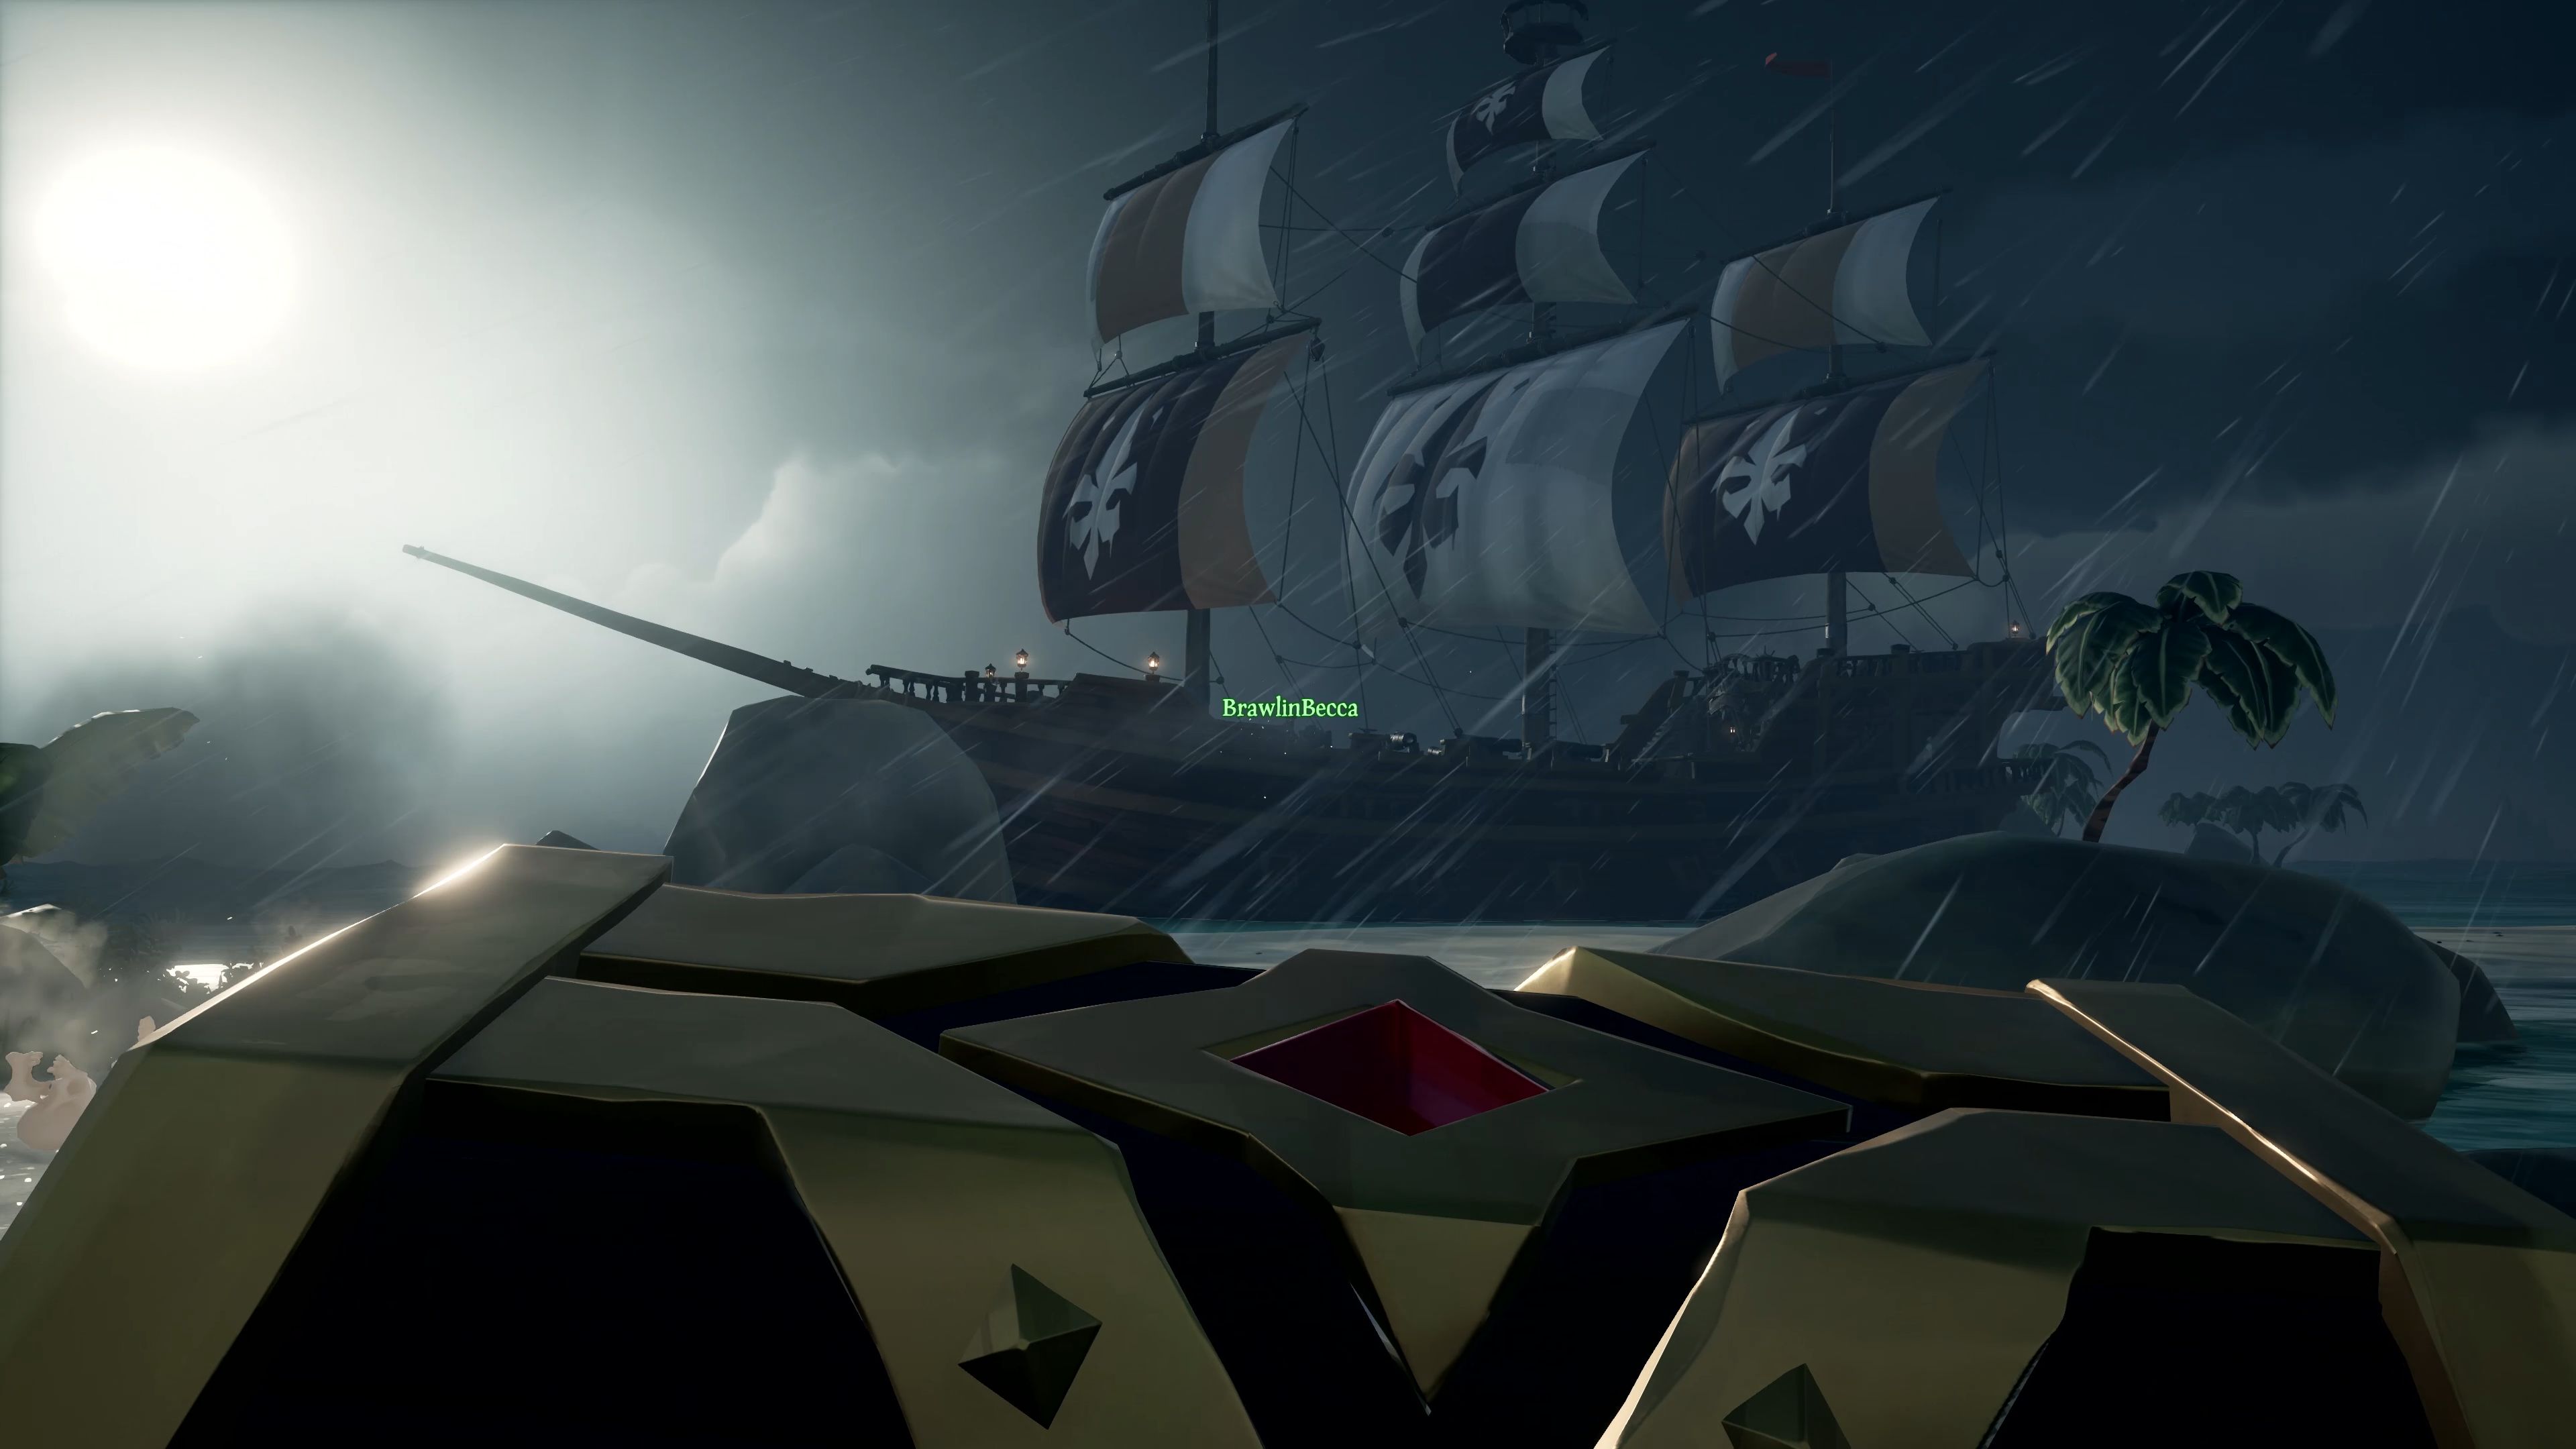 Galerie: Sea of Thieves a Crackdown 3 145868